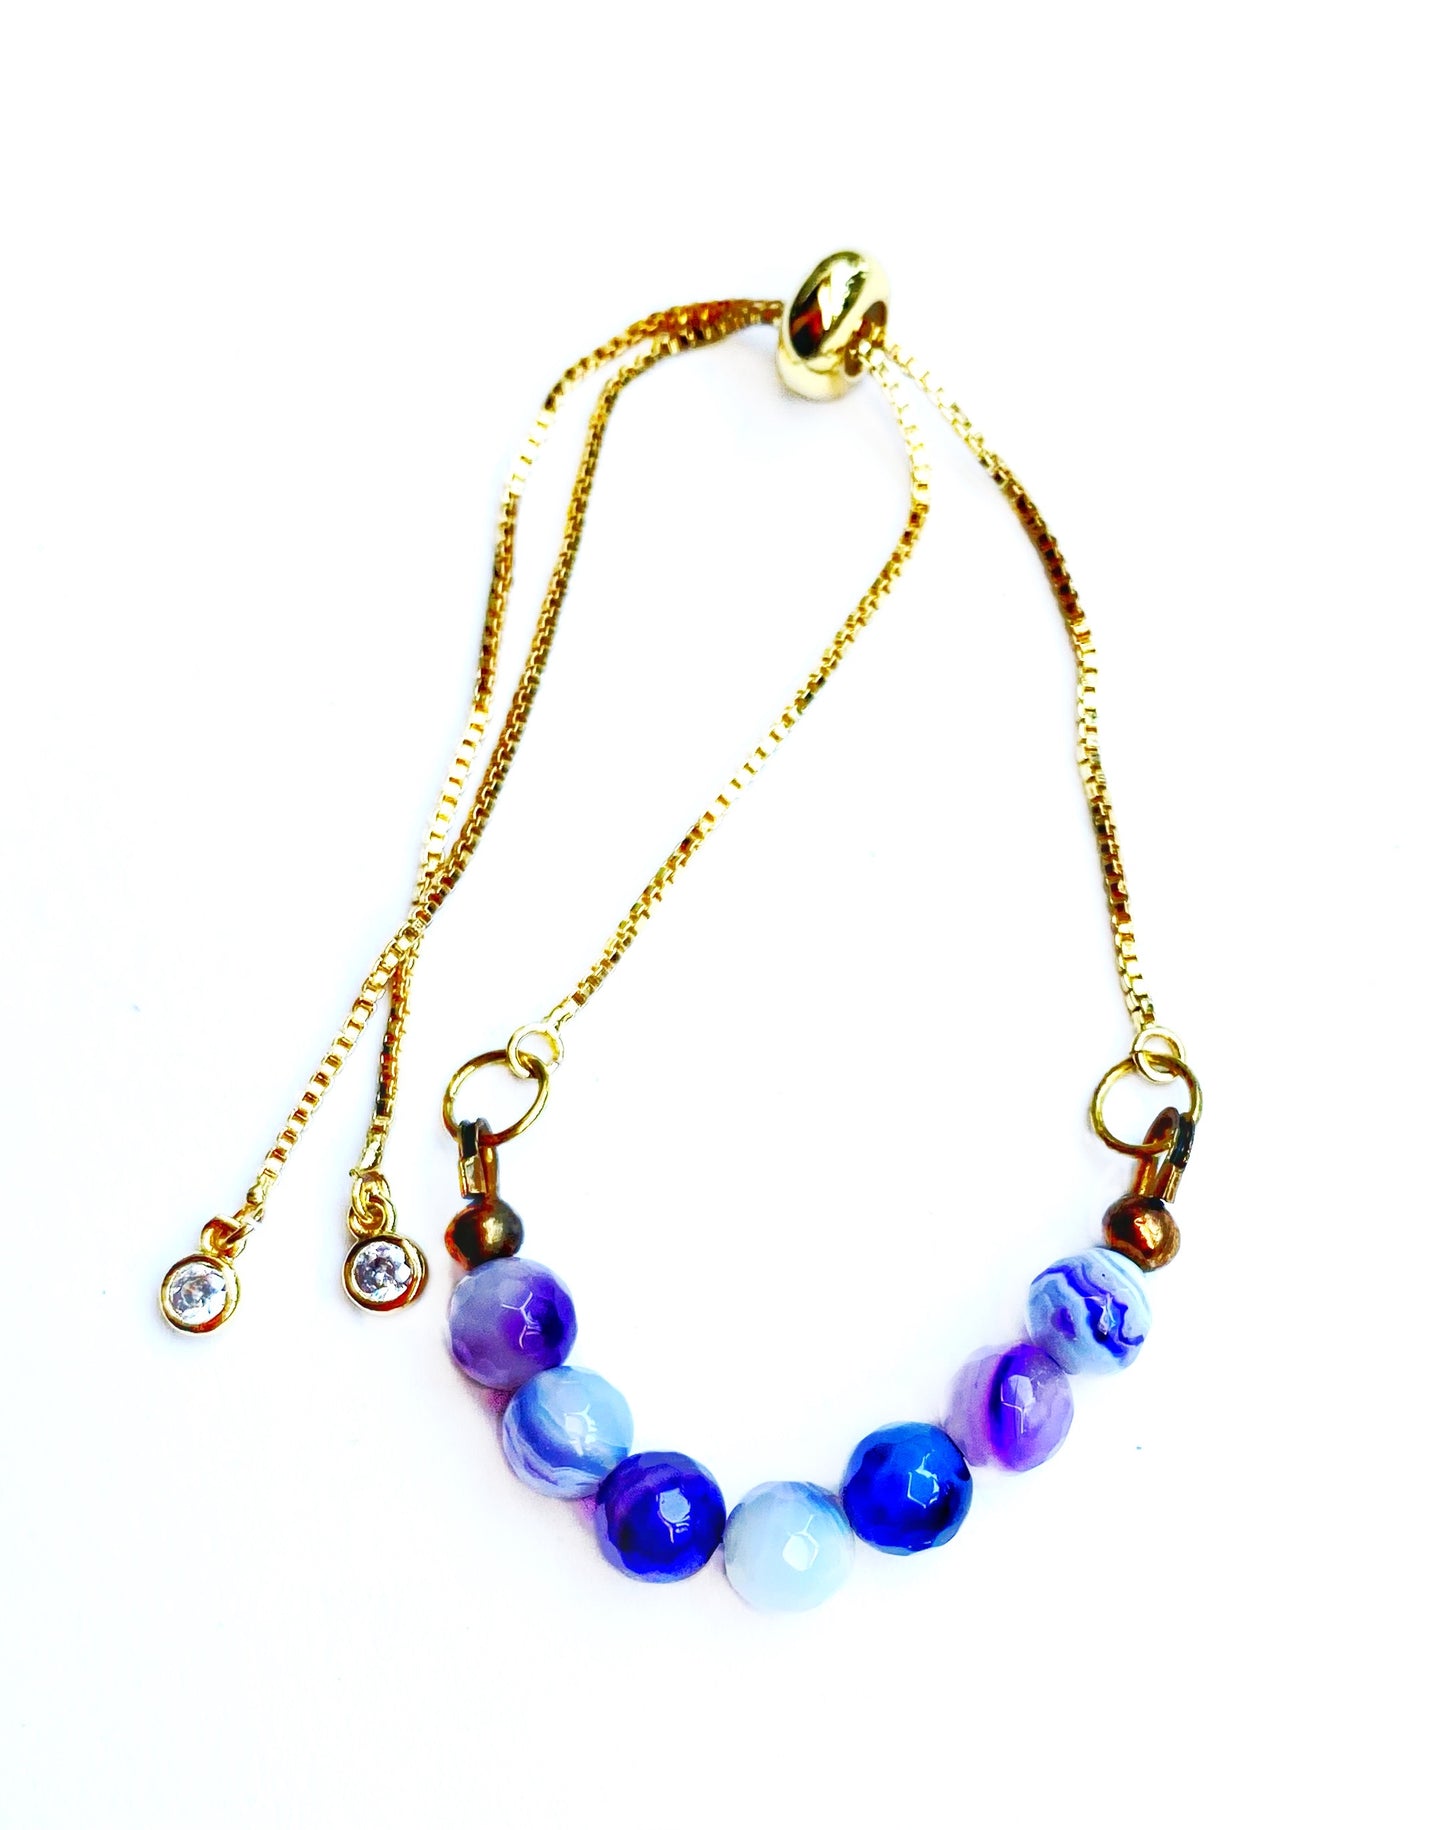 Gold-Plated Boho Bracelet with Purple Agate Beads